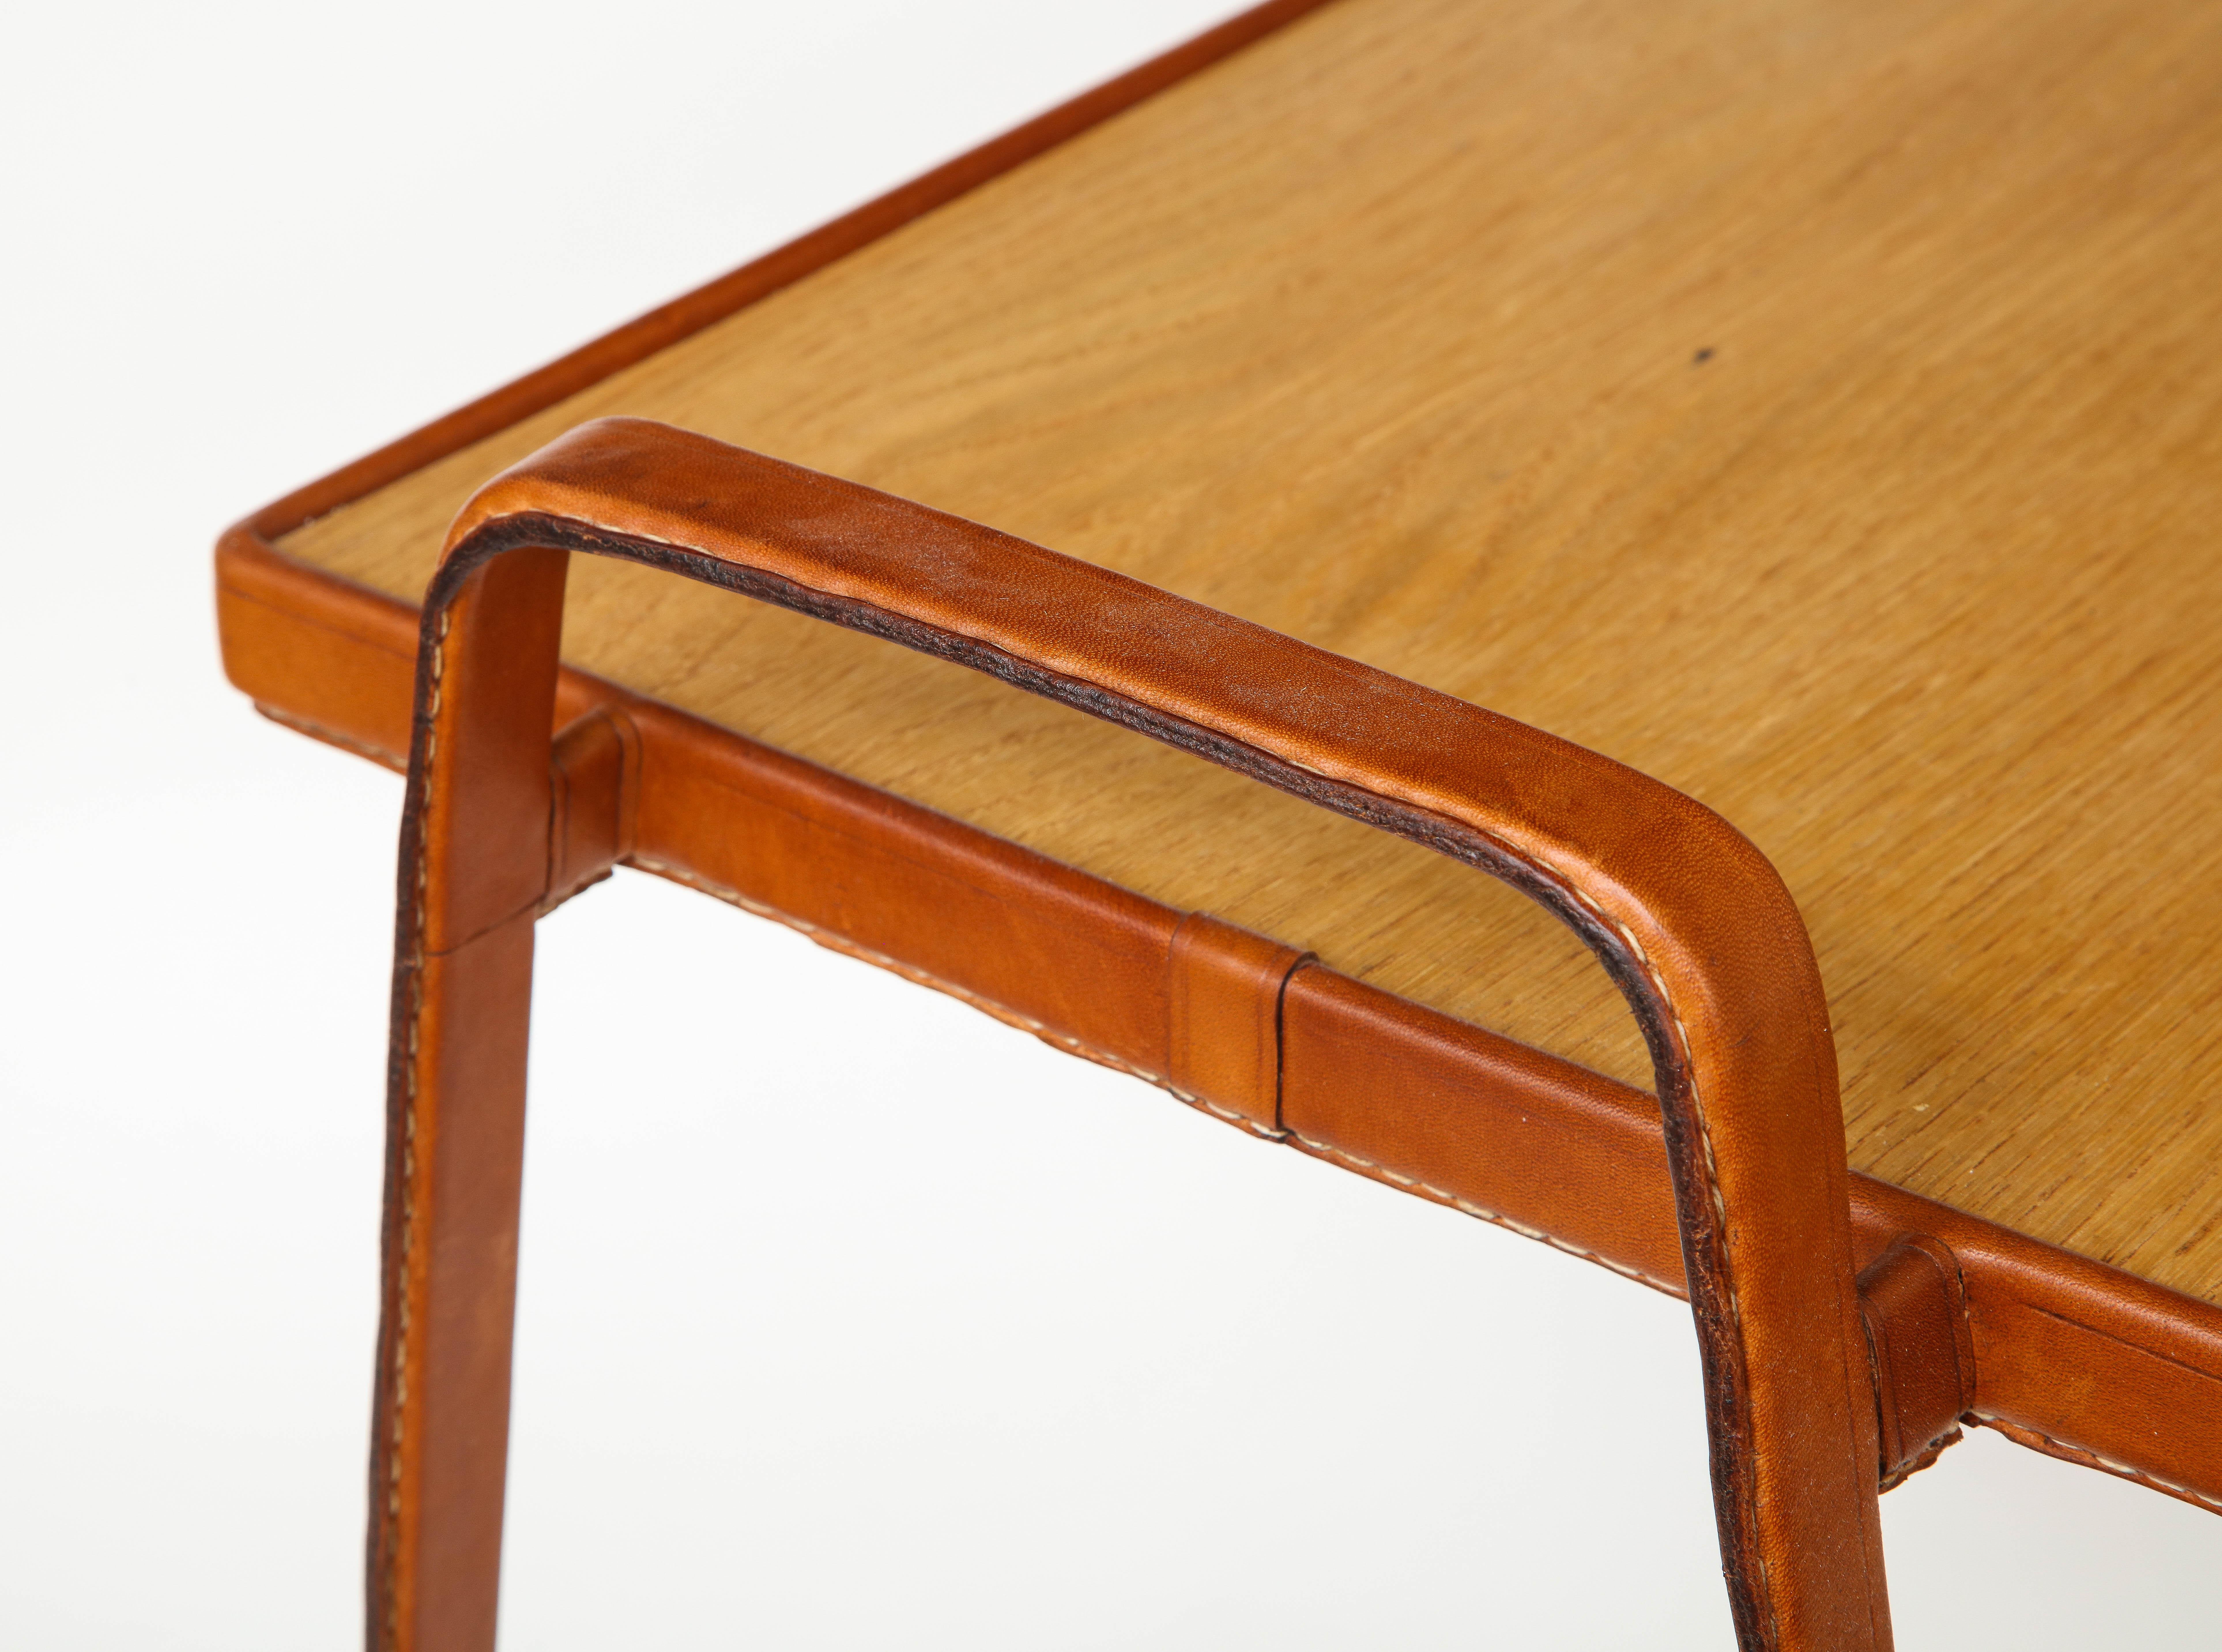 Mid-20th Century Leather Stitched Side Table by Jacques Adnet, c. 1950 For Sale